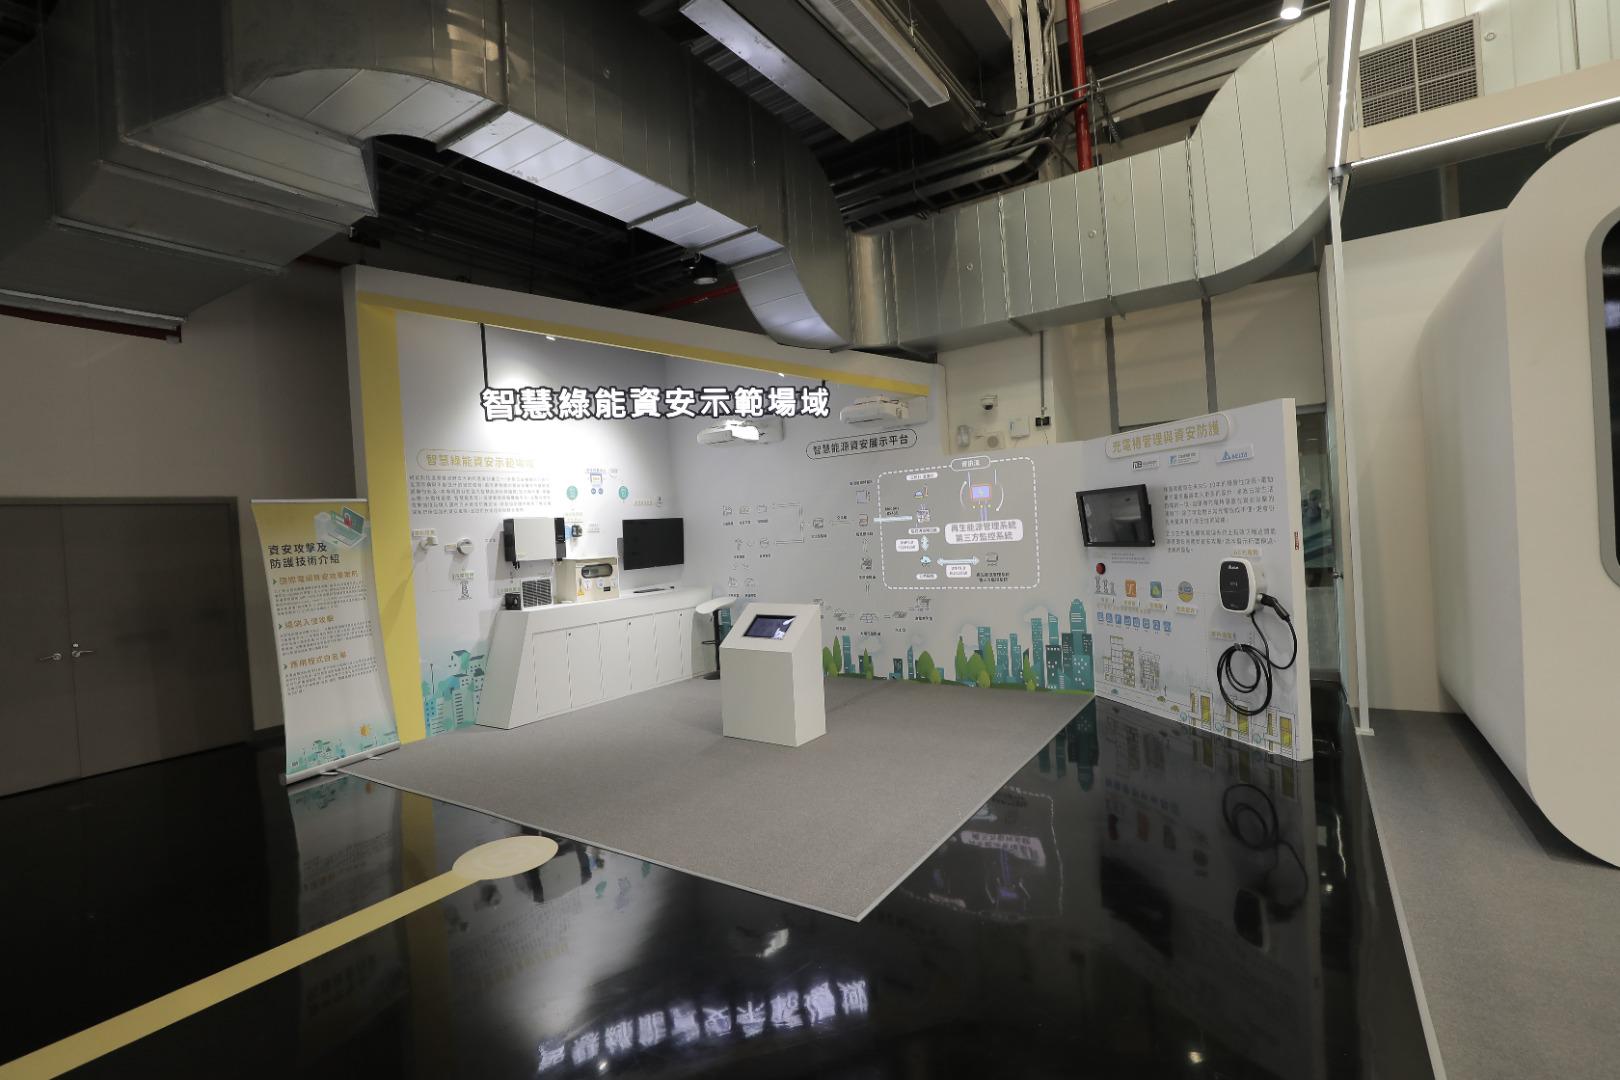 Wang Yi Design, Industrial Technology Research Institute, Shalun Information Security Service Base, Sustainable Design, Interactive Experience